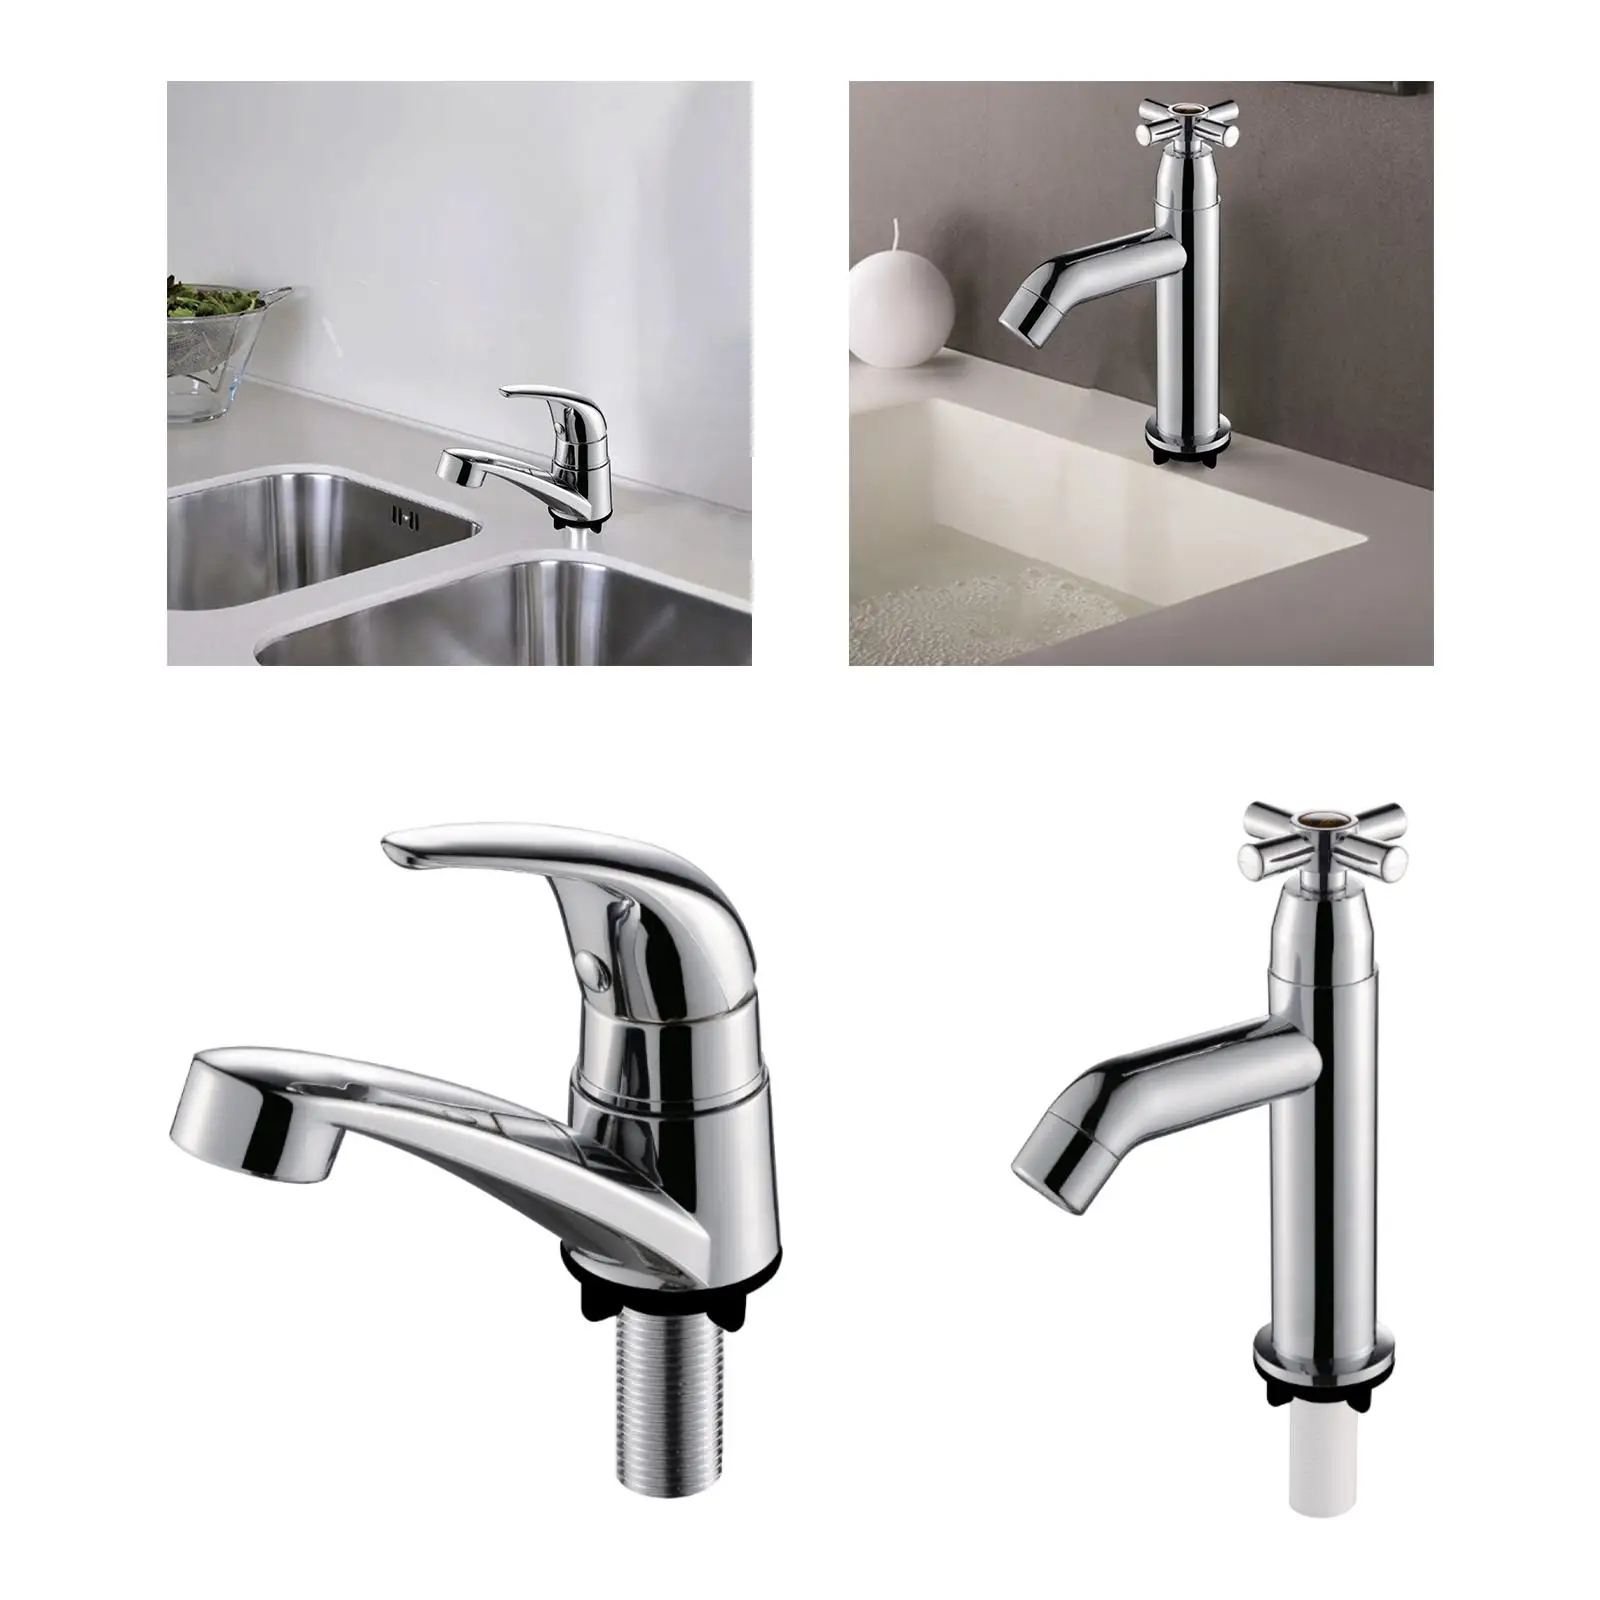 Washing Machine Faucet Household Water Dispenser Faucet for Shower Lawn Pool